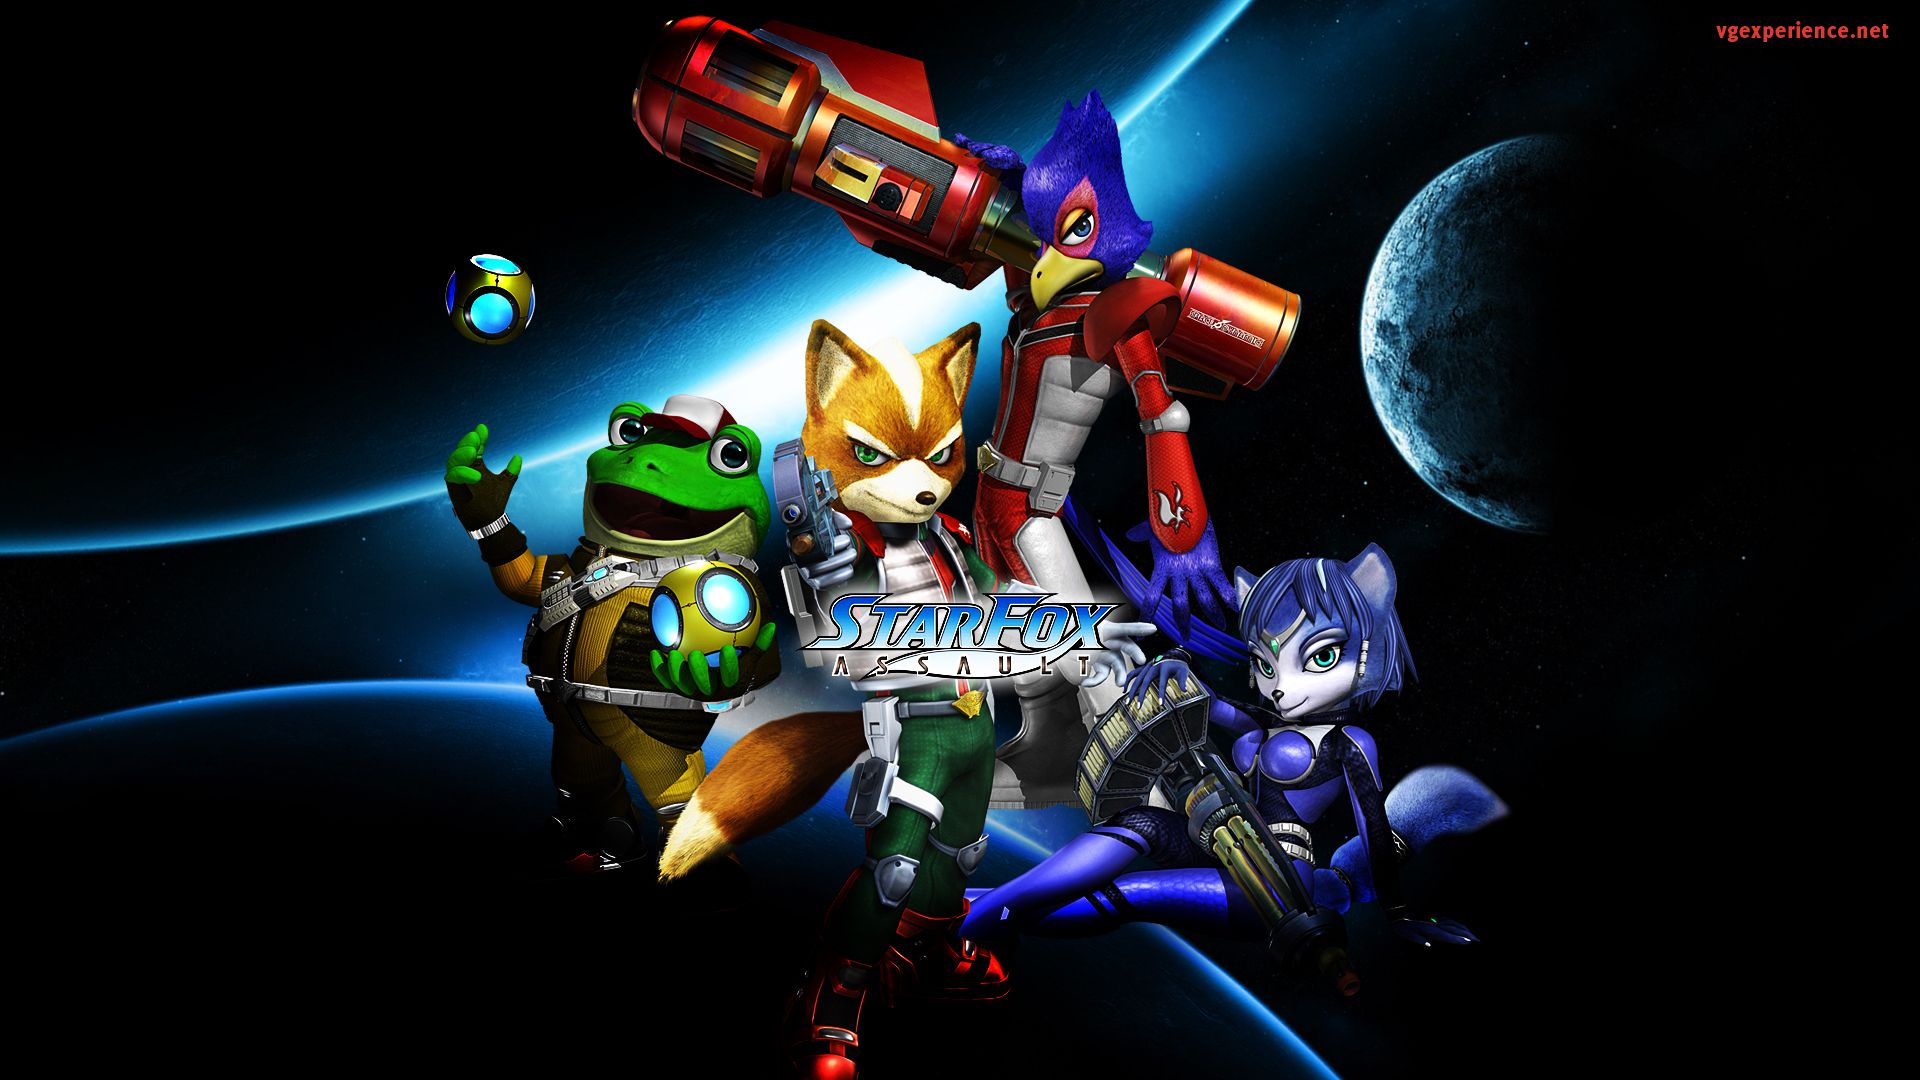 Some Starfox Pictures :3 - Video Games Photo (36954308) - Fanpop